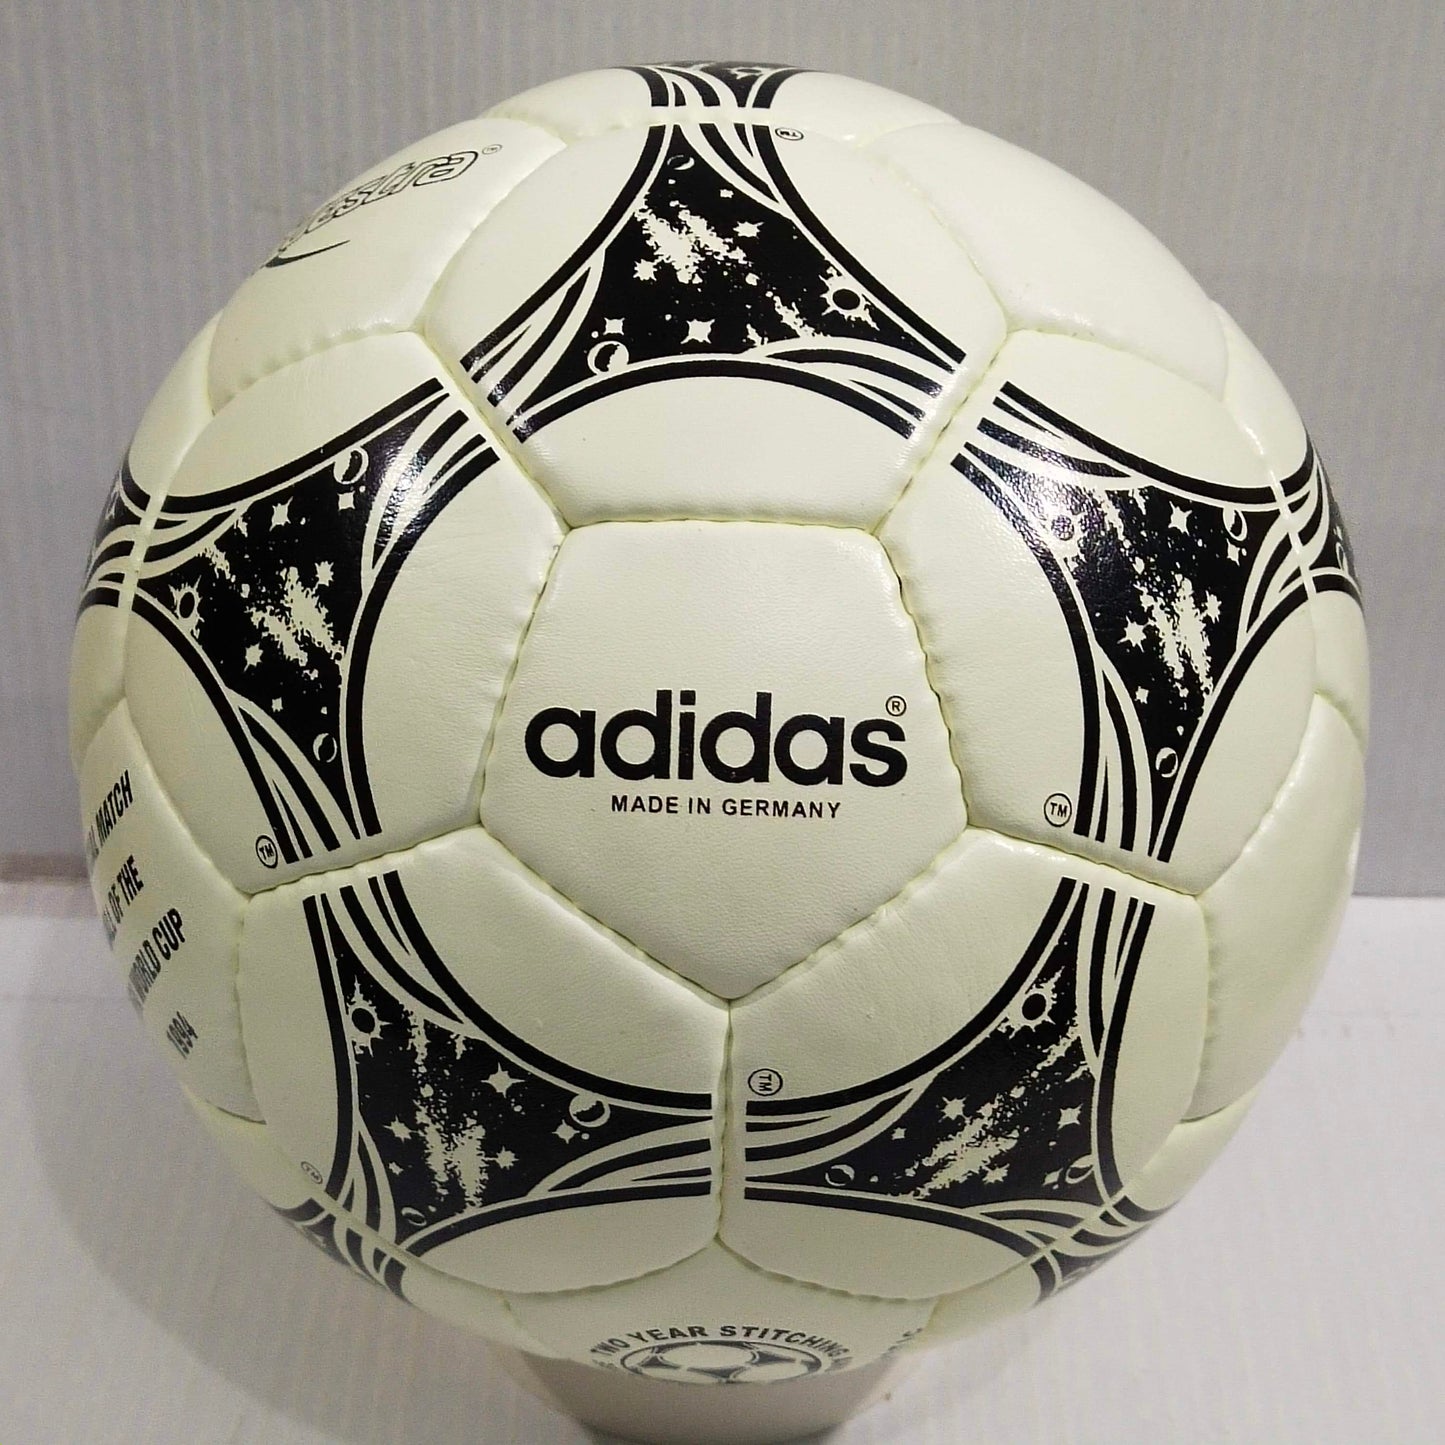 Adidas Questra | 1994 FIFA World Cup Ball | Genuine Leather Off White | SIZE 5 03